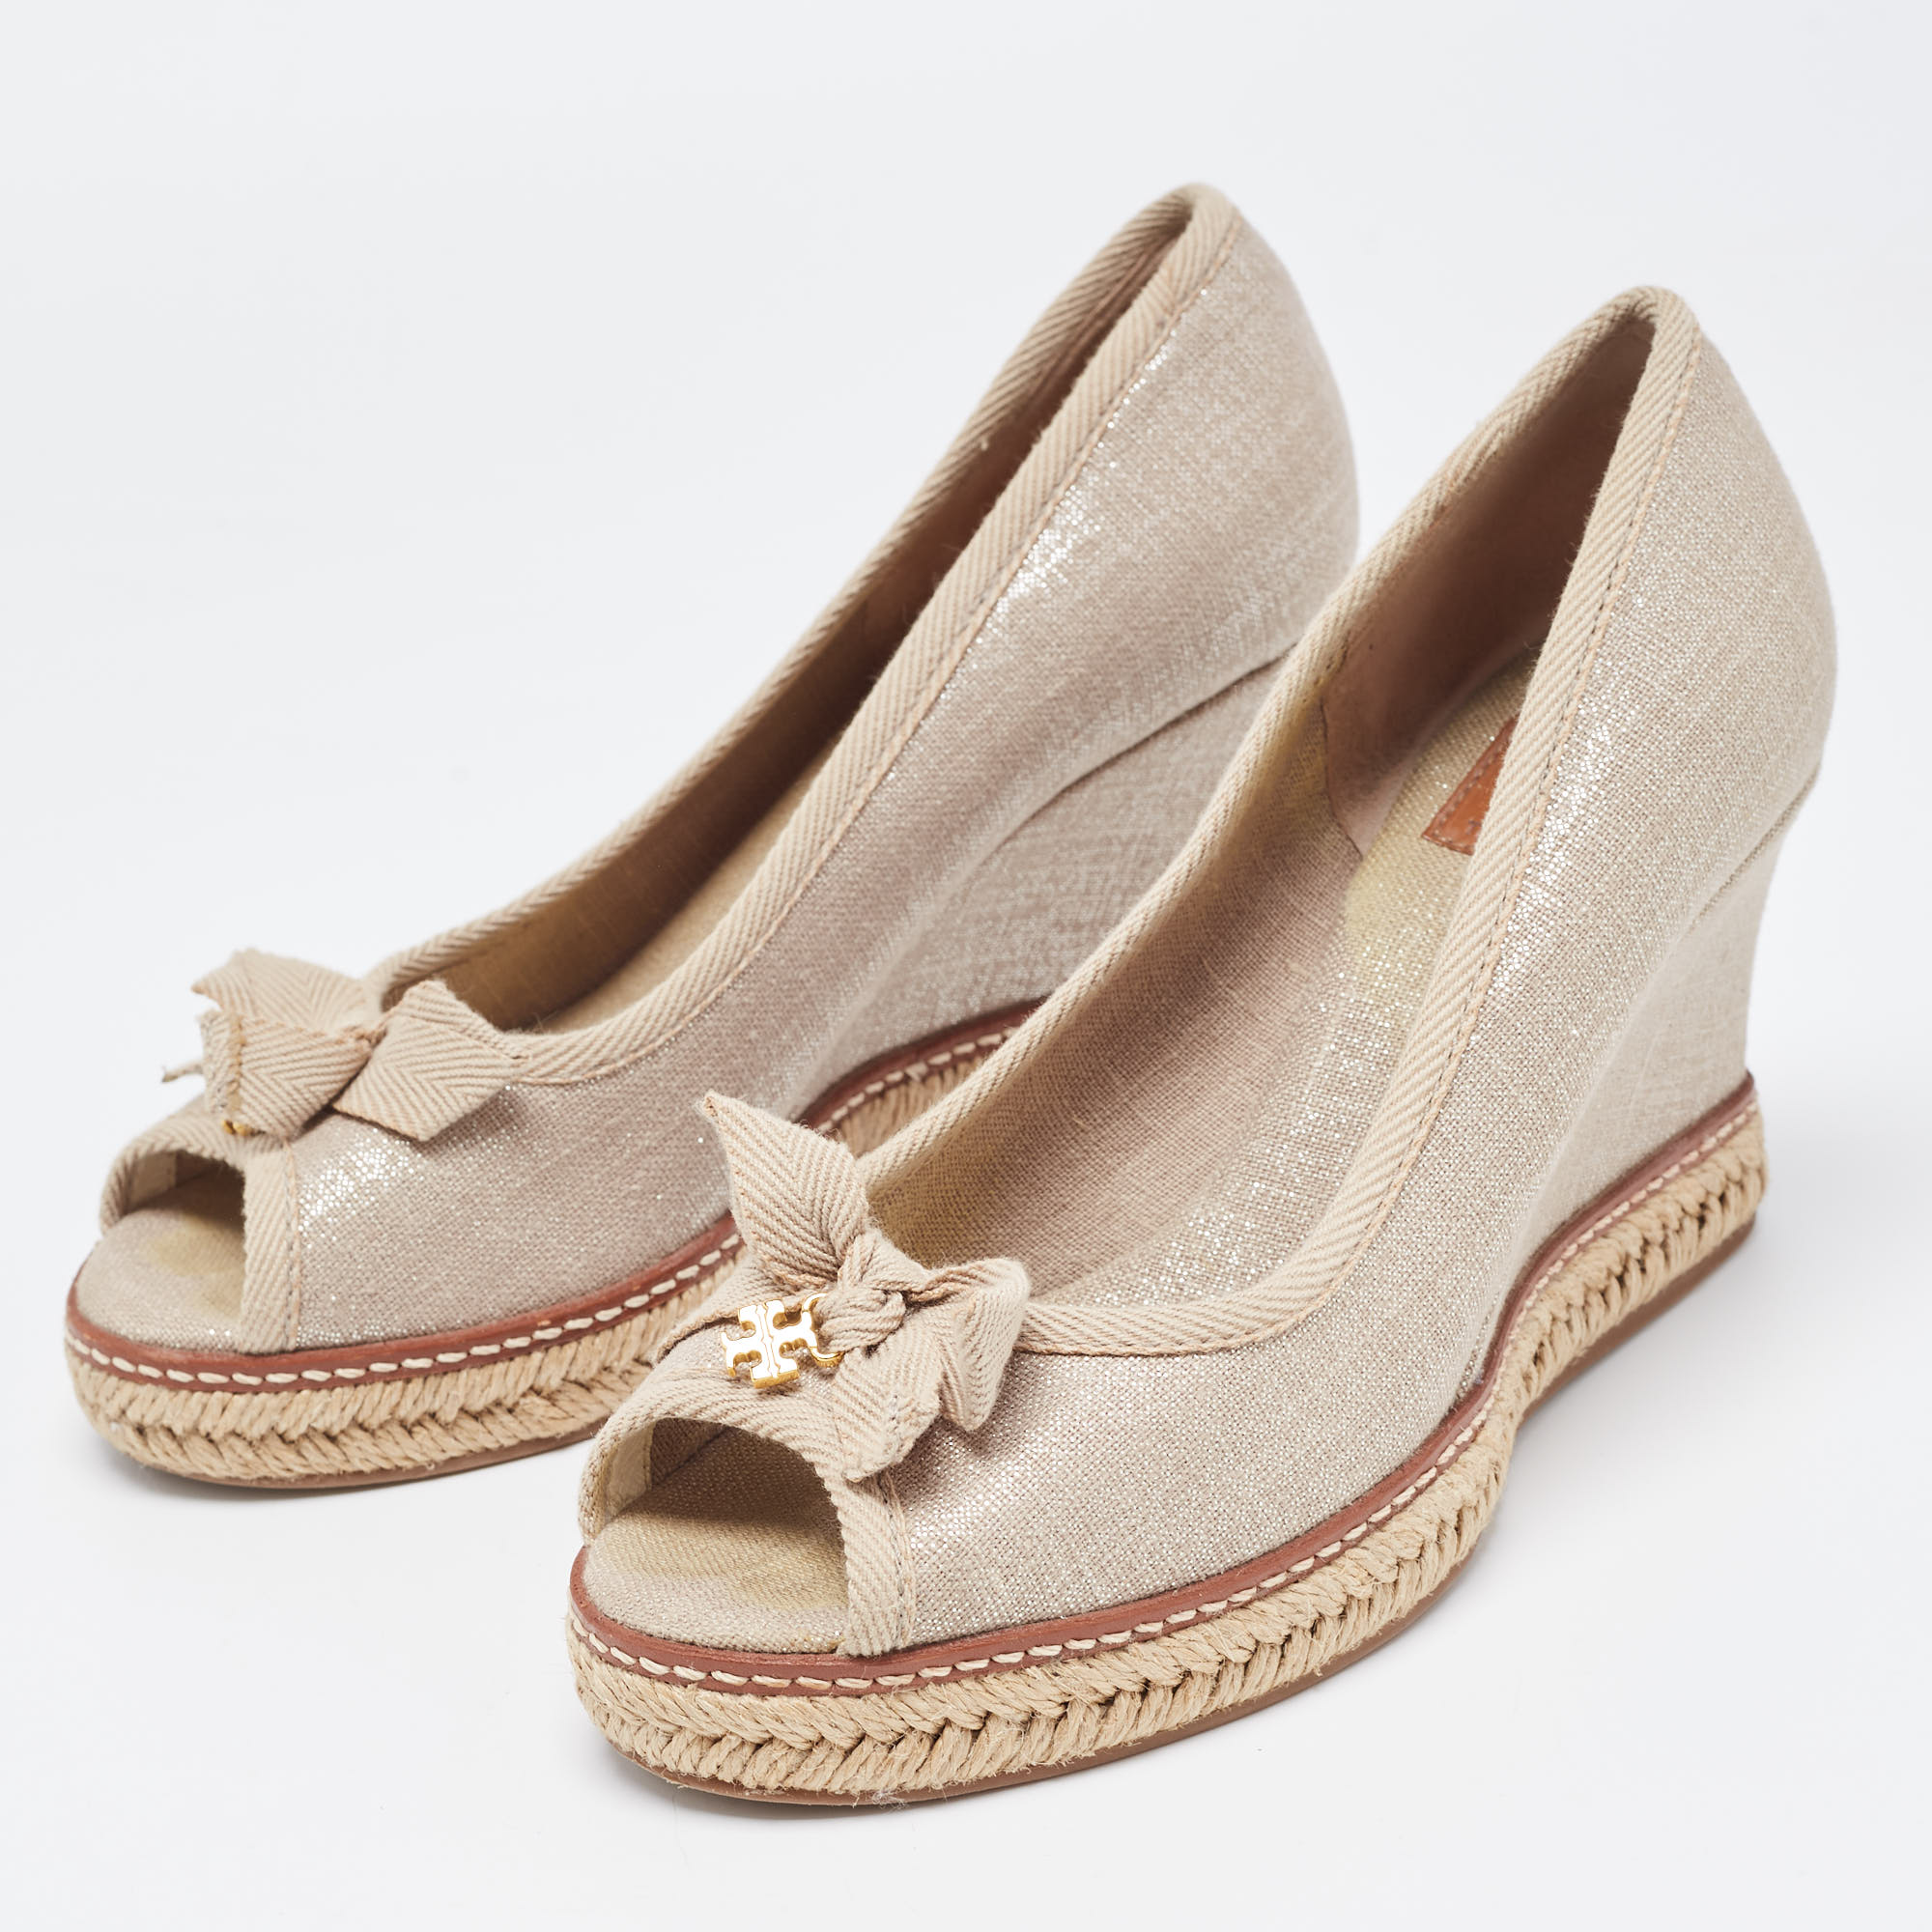 

Tory Burch Grey Canvas Jackie Bow Espadrille Wedge Pumps Size